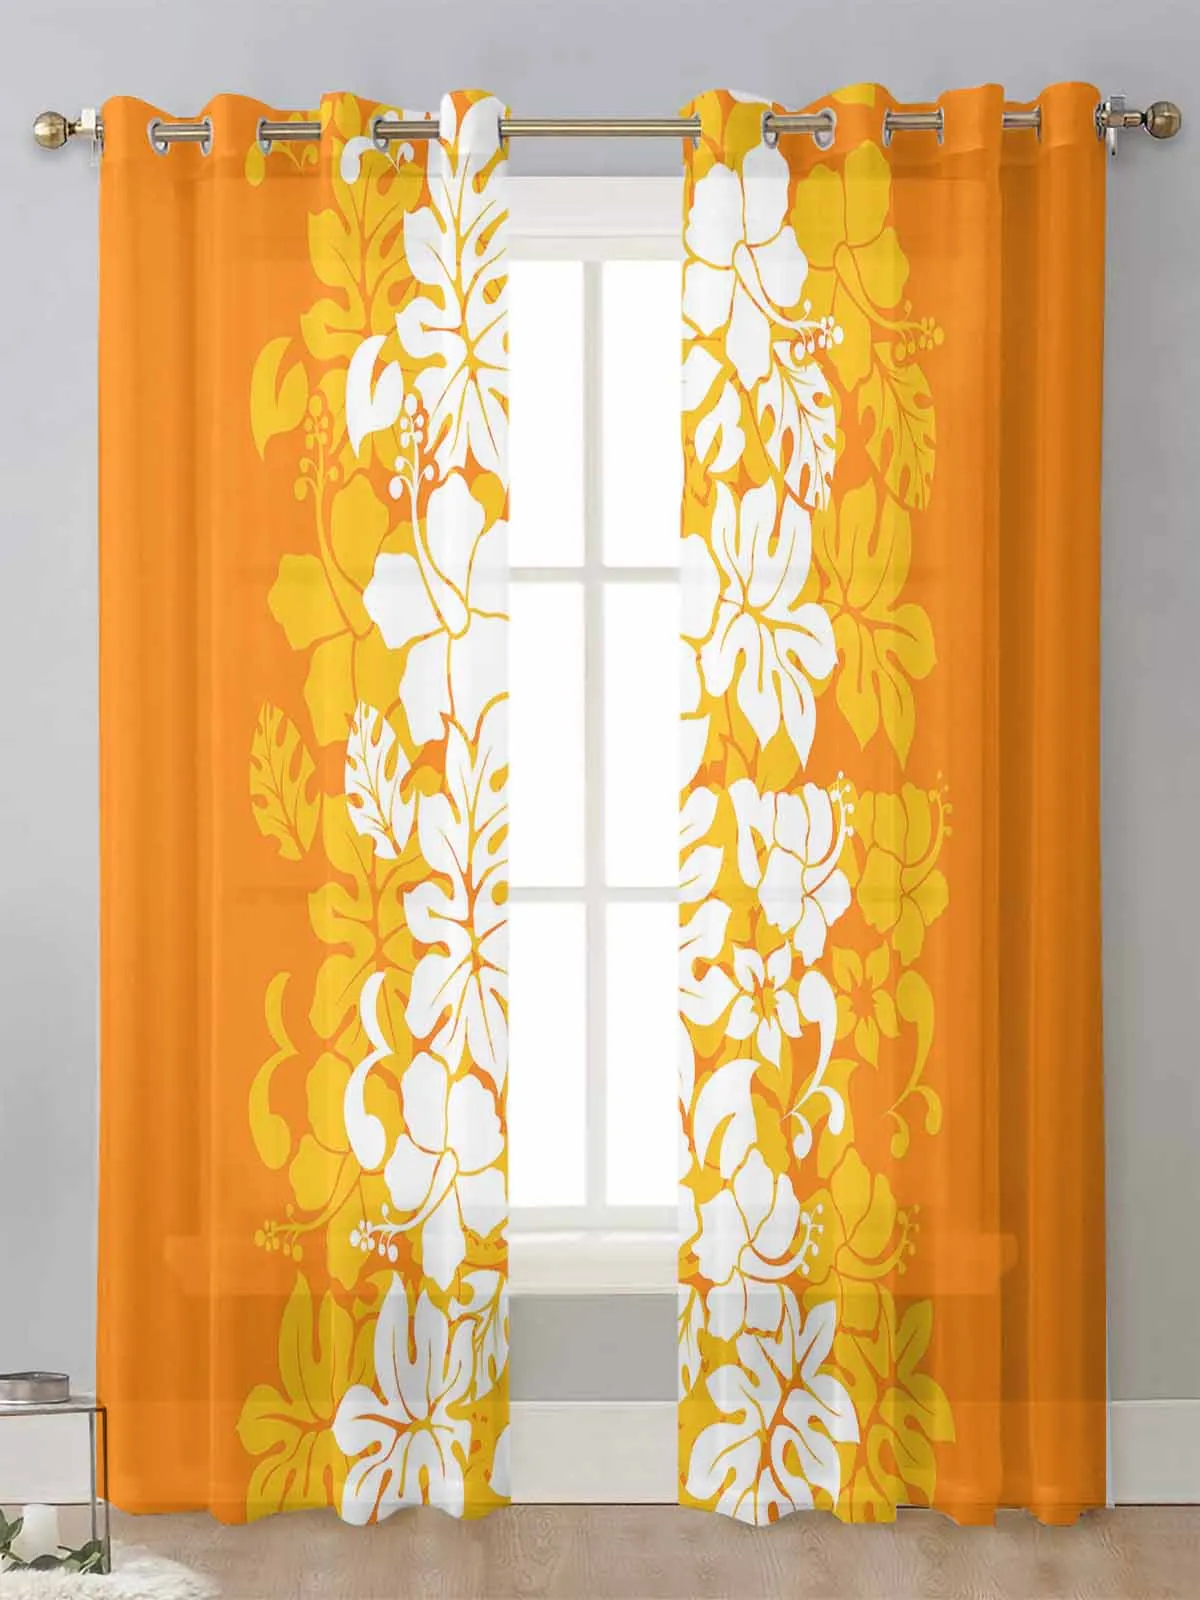 

Hawaiian Tropical Flower Texture Sheer Curtains For Living Room Window Voile Tulle Curtain Cortinas Drapes Home Decor